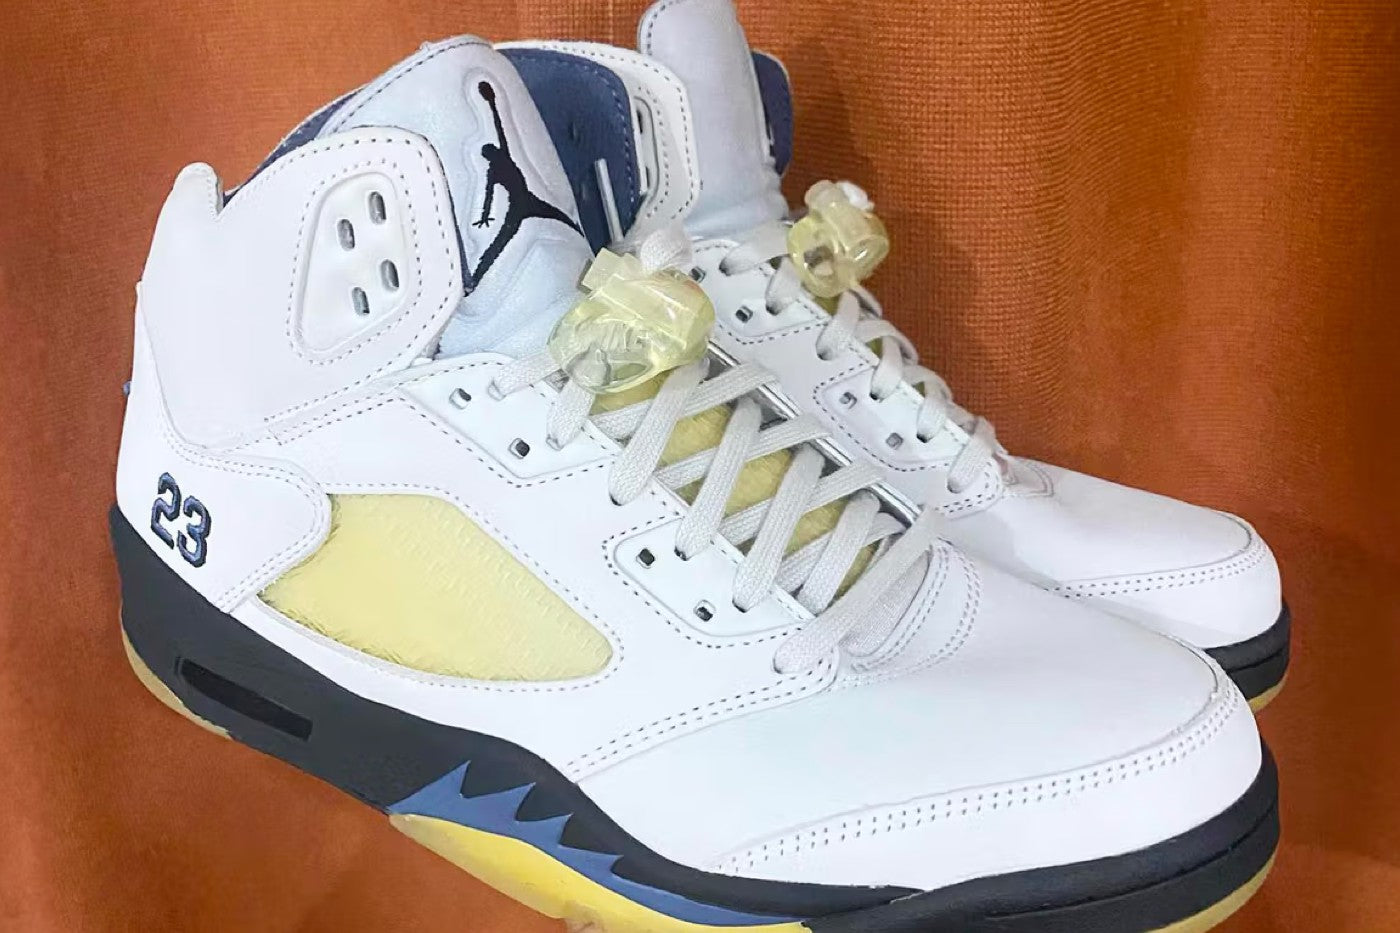 Get Up Close With the A Ma Maniére x Air Jordan 5 "Diffused Blue"